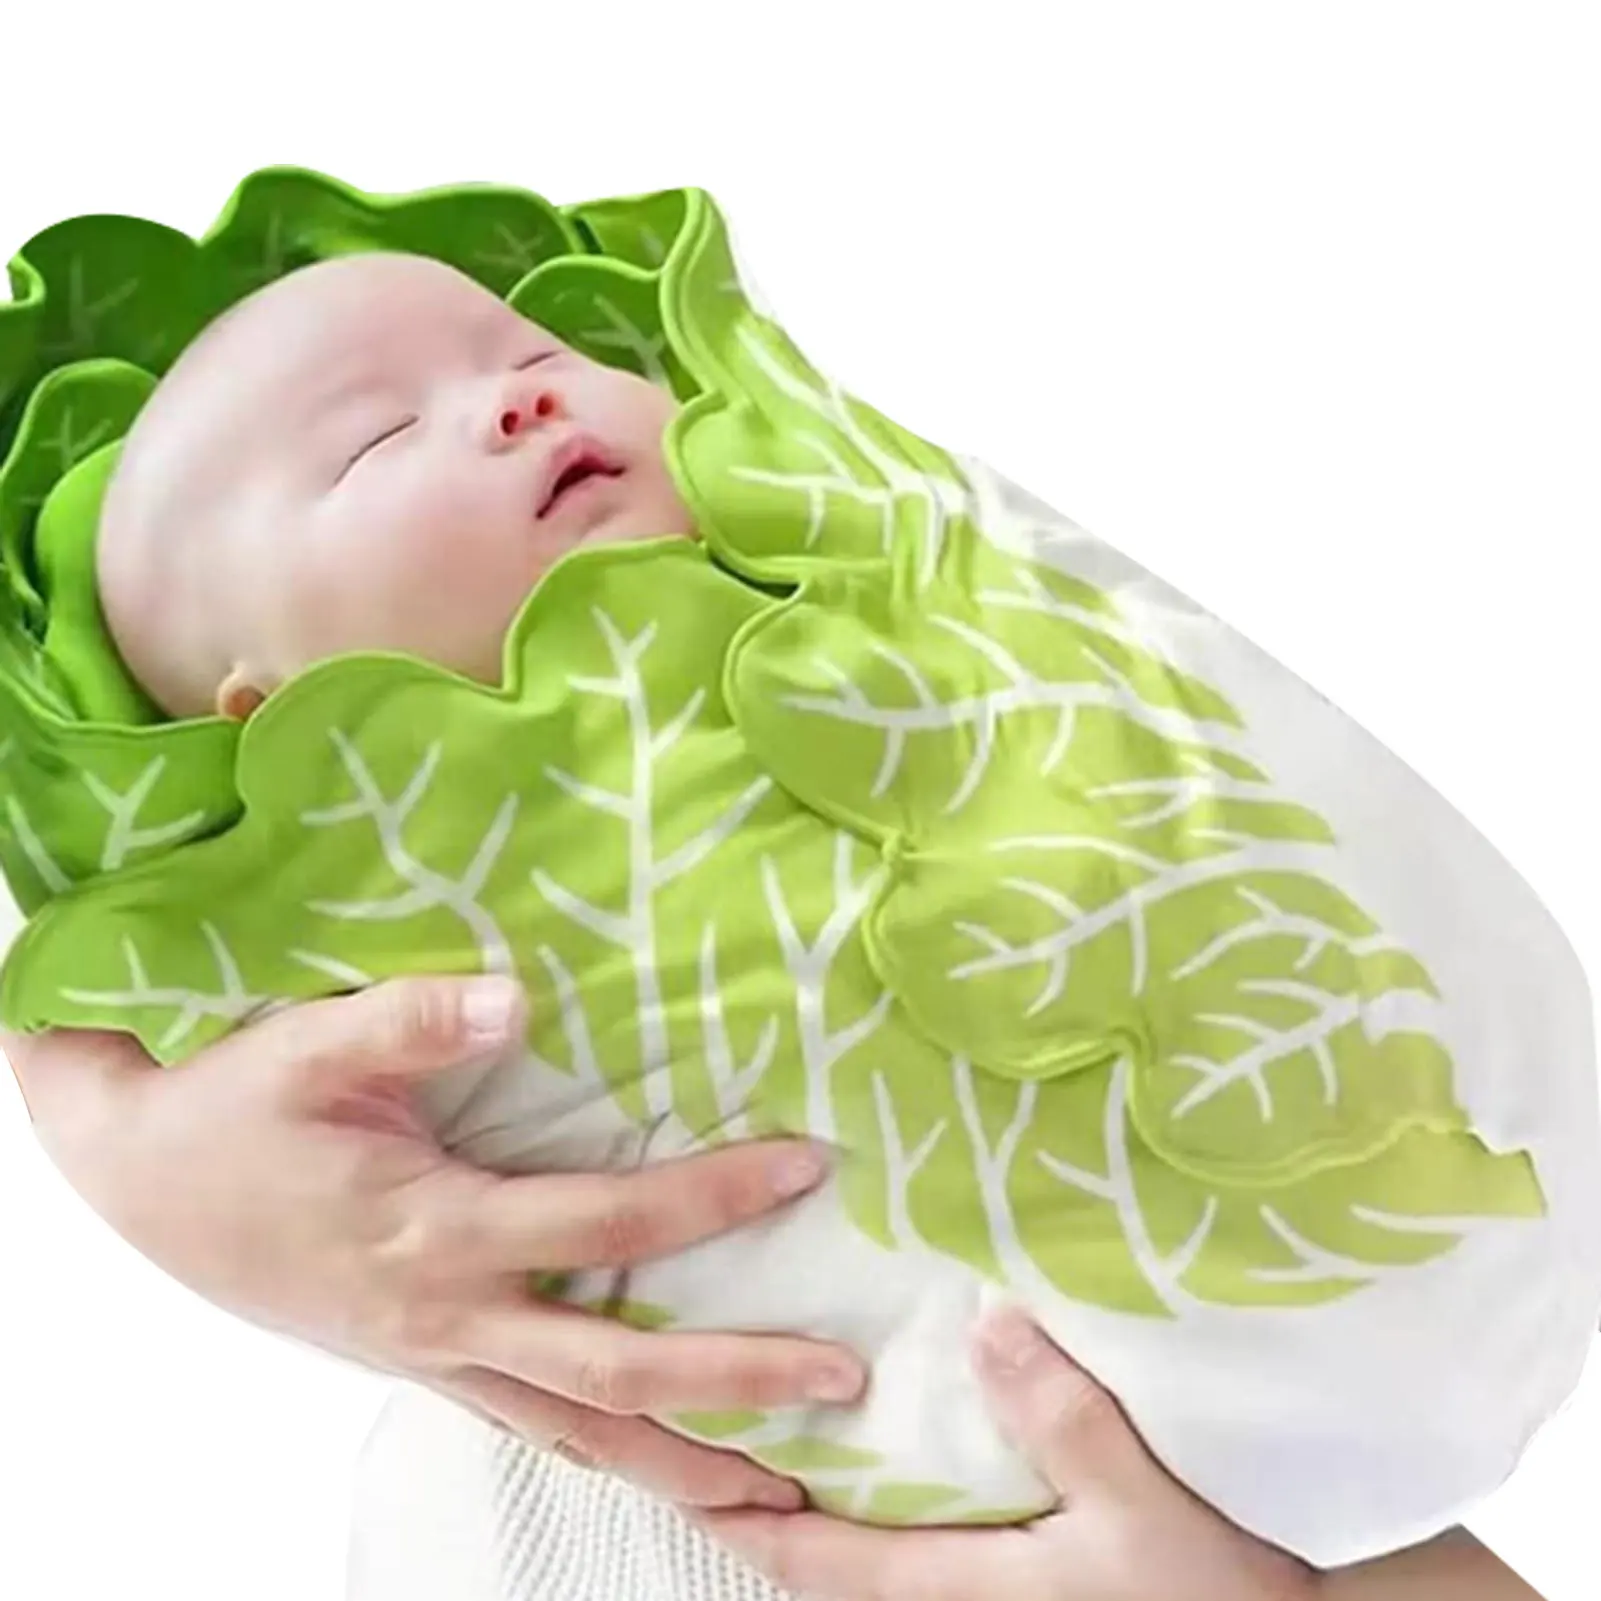 

Swaddle Blanket Safe Healthy Baby Blankets With Cap Soft Cotton Infant Sleep Sack Wrap Sense Of Security Chinese Cabbage Shape